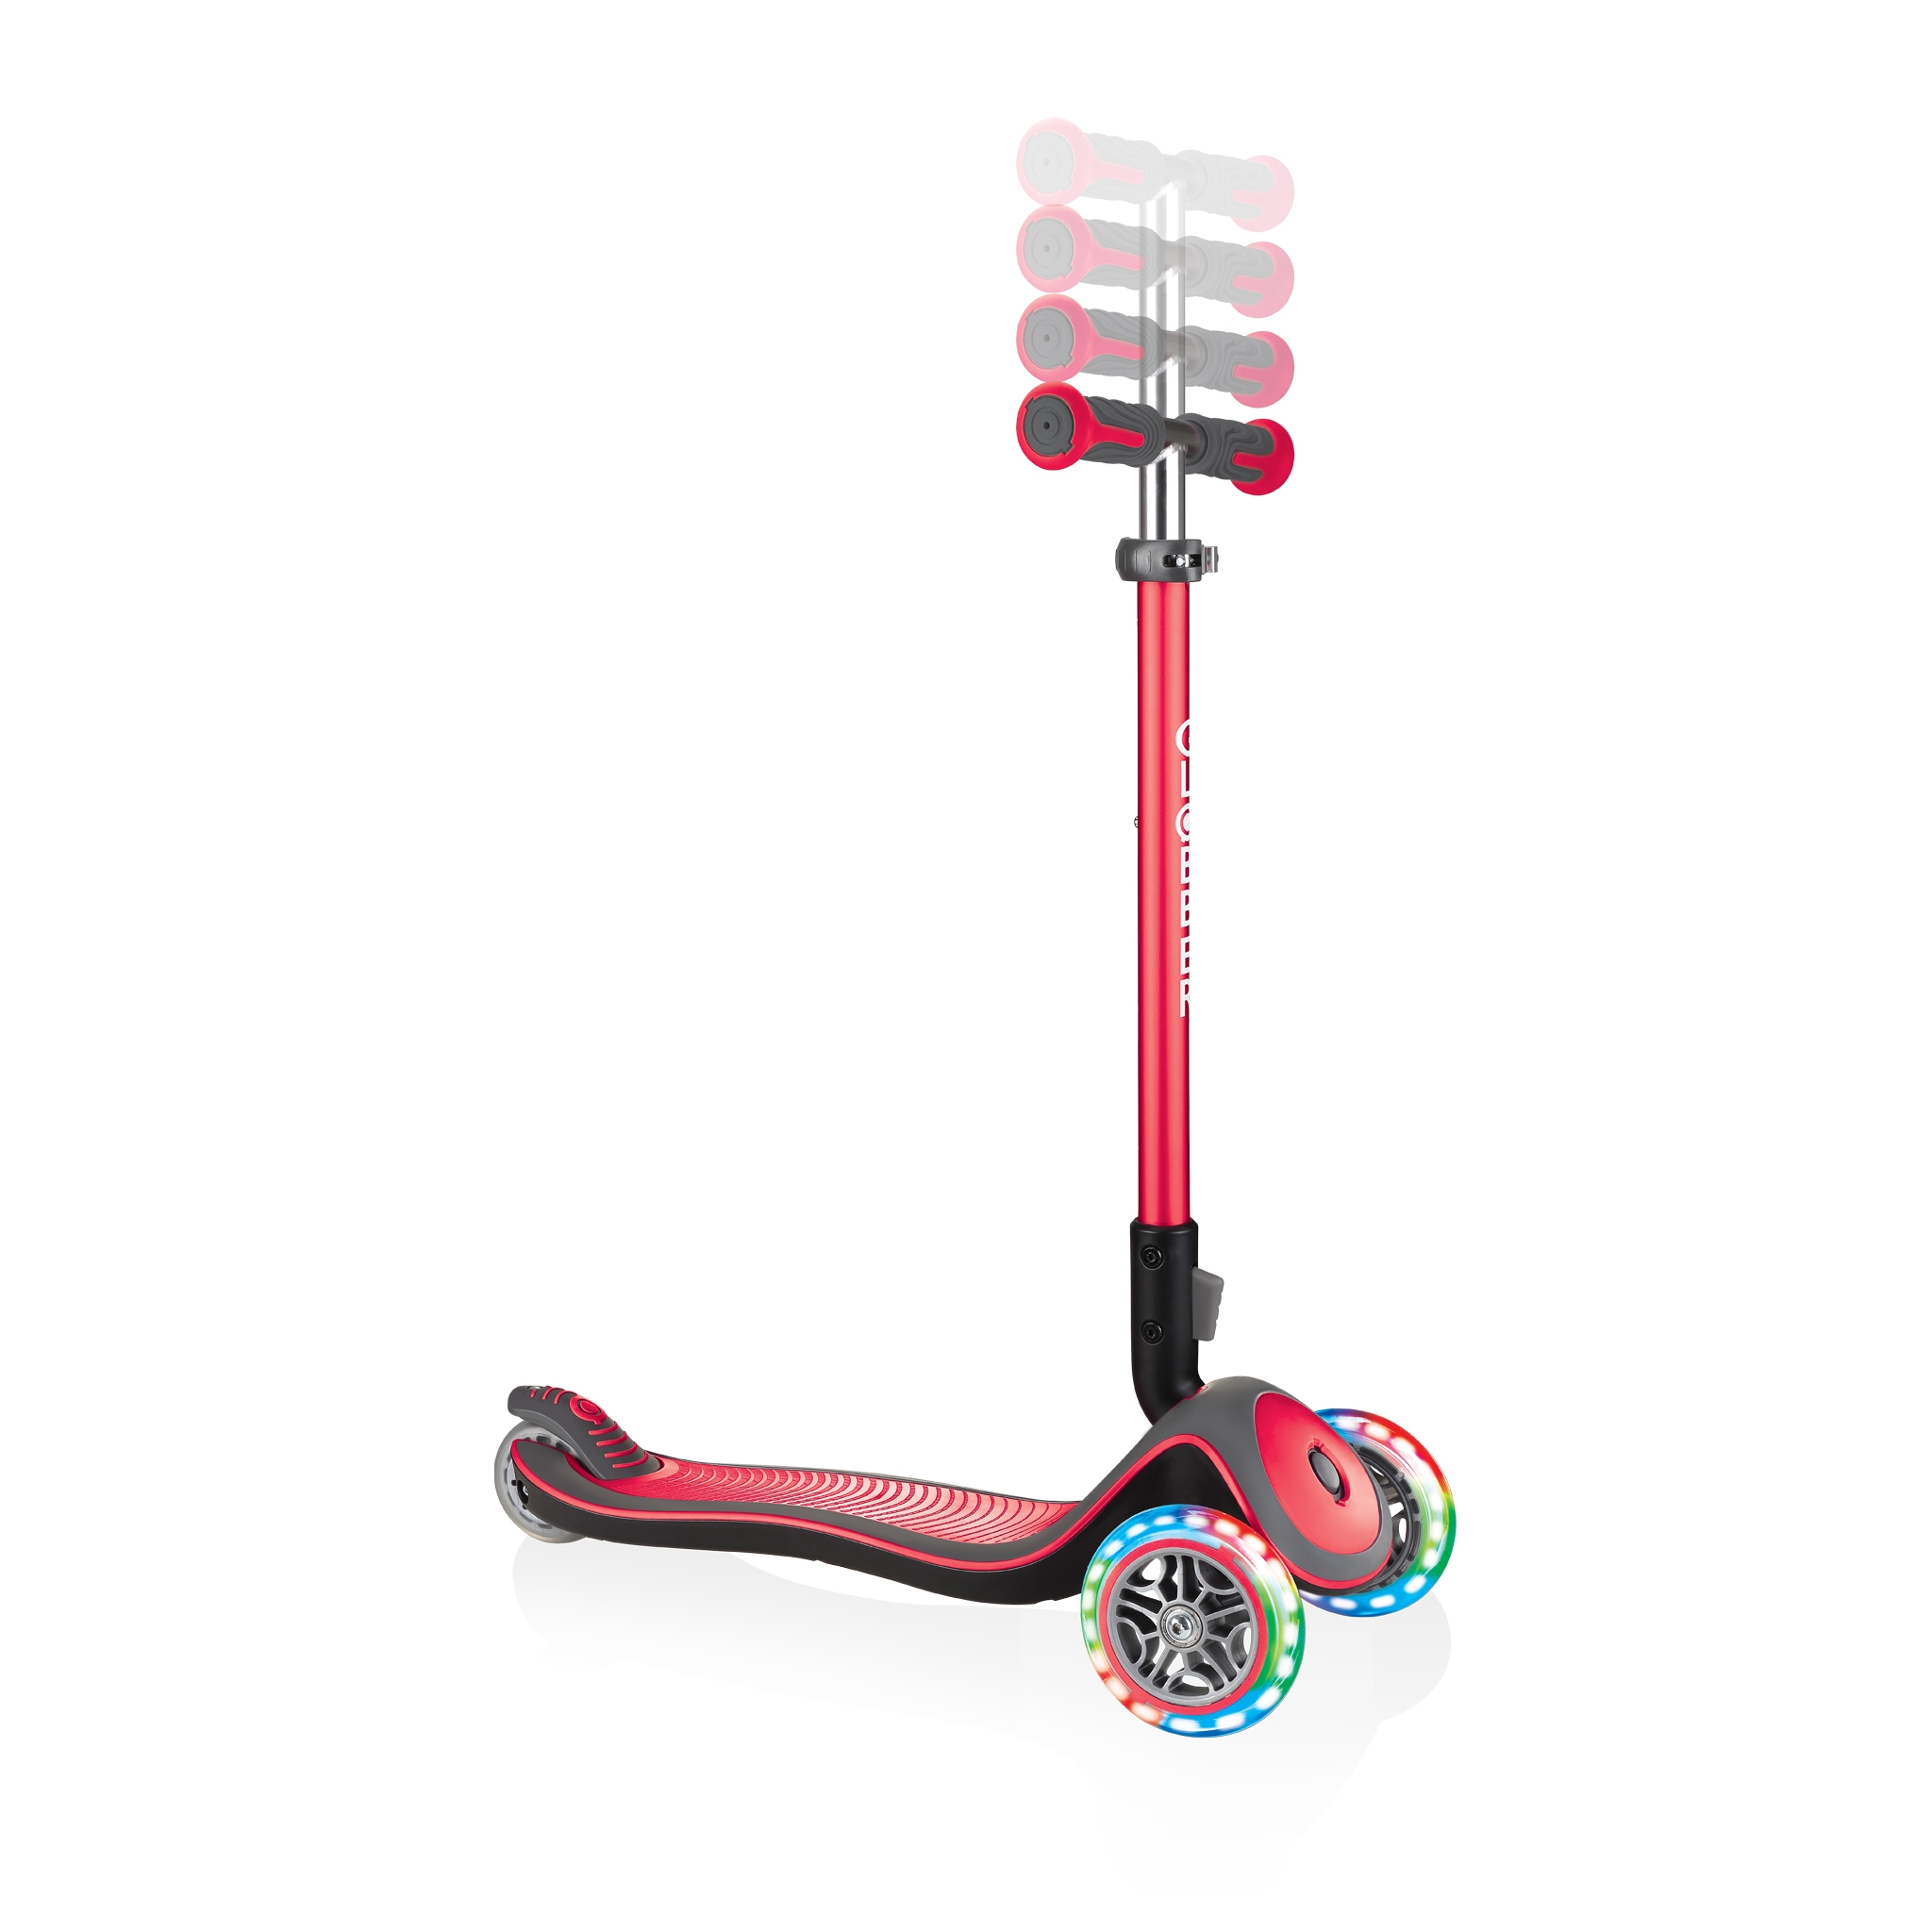 Globber-ELITE-DELUXE-LIGHTS-3-wheel-adjustable-scooter-for-kids-with-light-up-scooter-wheels-new-red 0